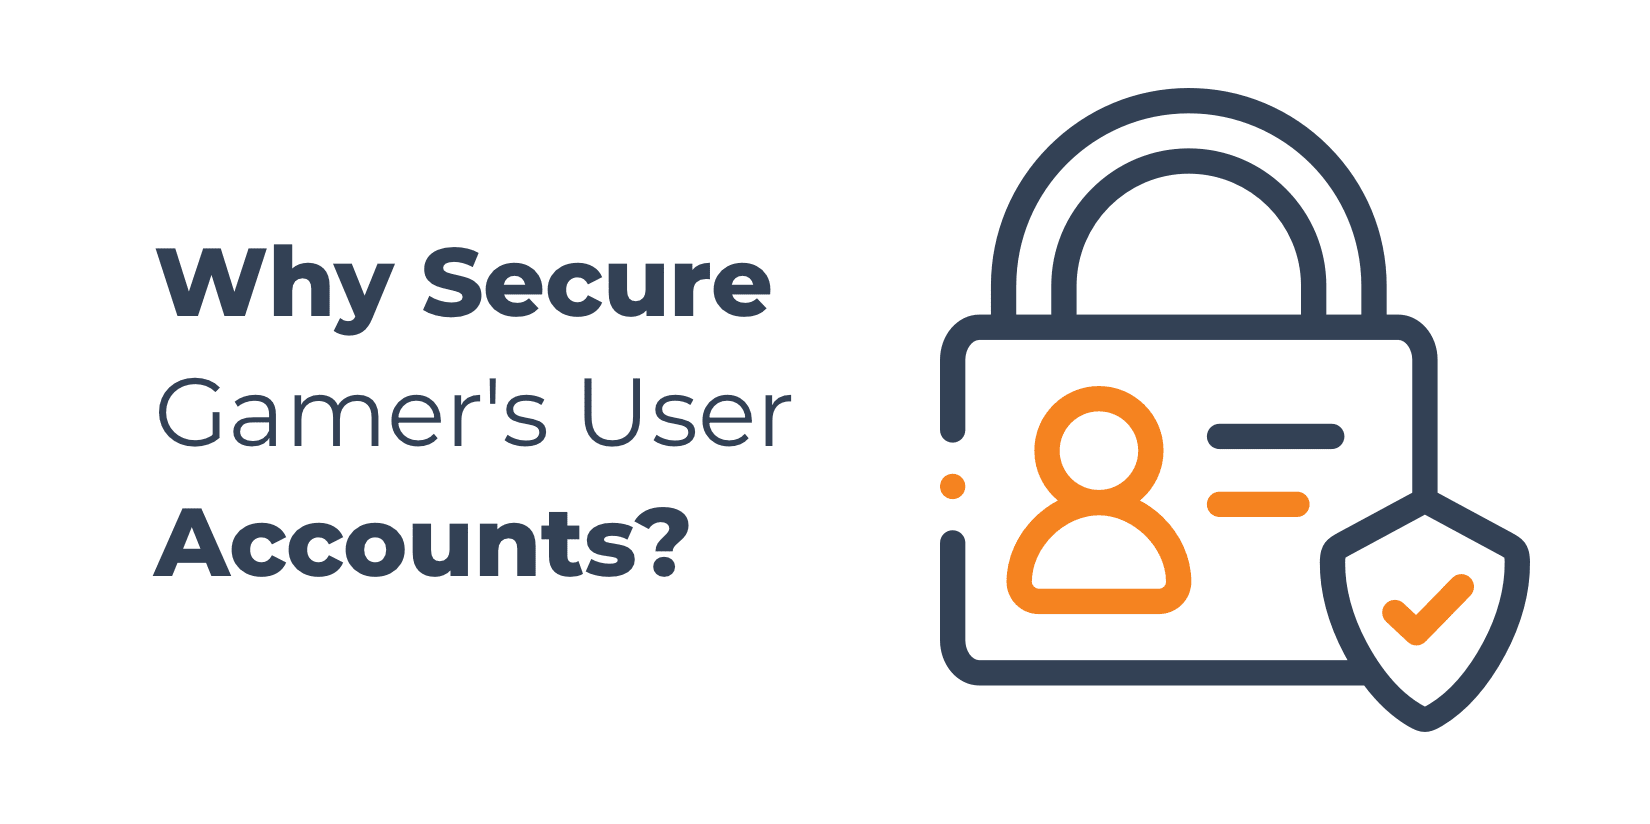 Why secure gamer's user accounts?